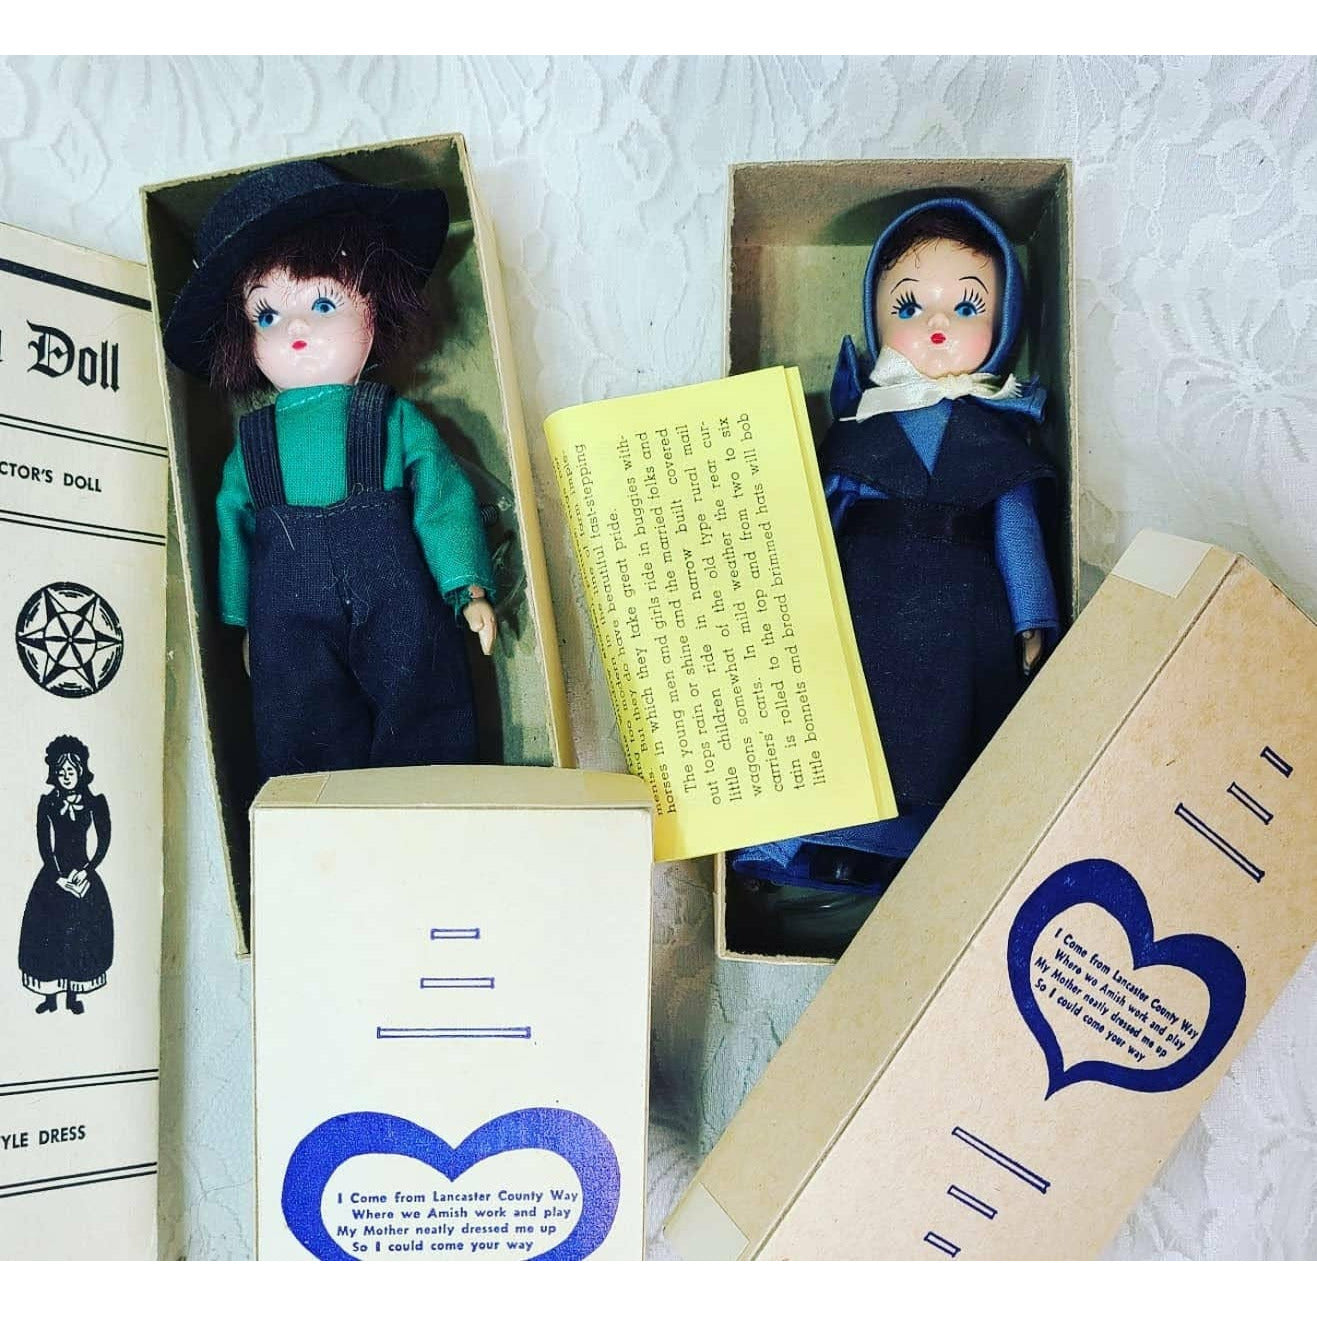 Handmade Amish Doll Family ~ Set of FOUR Vintage Celluloid Dolls ~ Hand-Sewn Clothing ~ ORIGINAL BOXES!